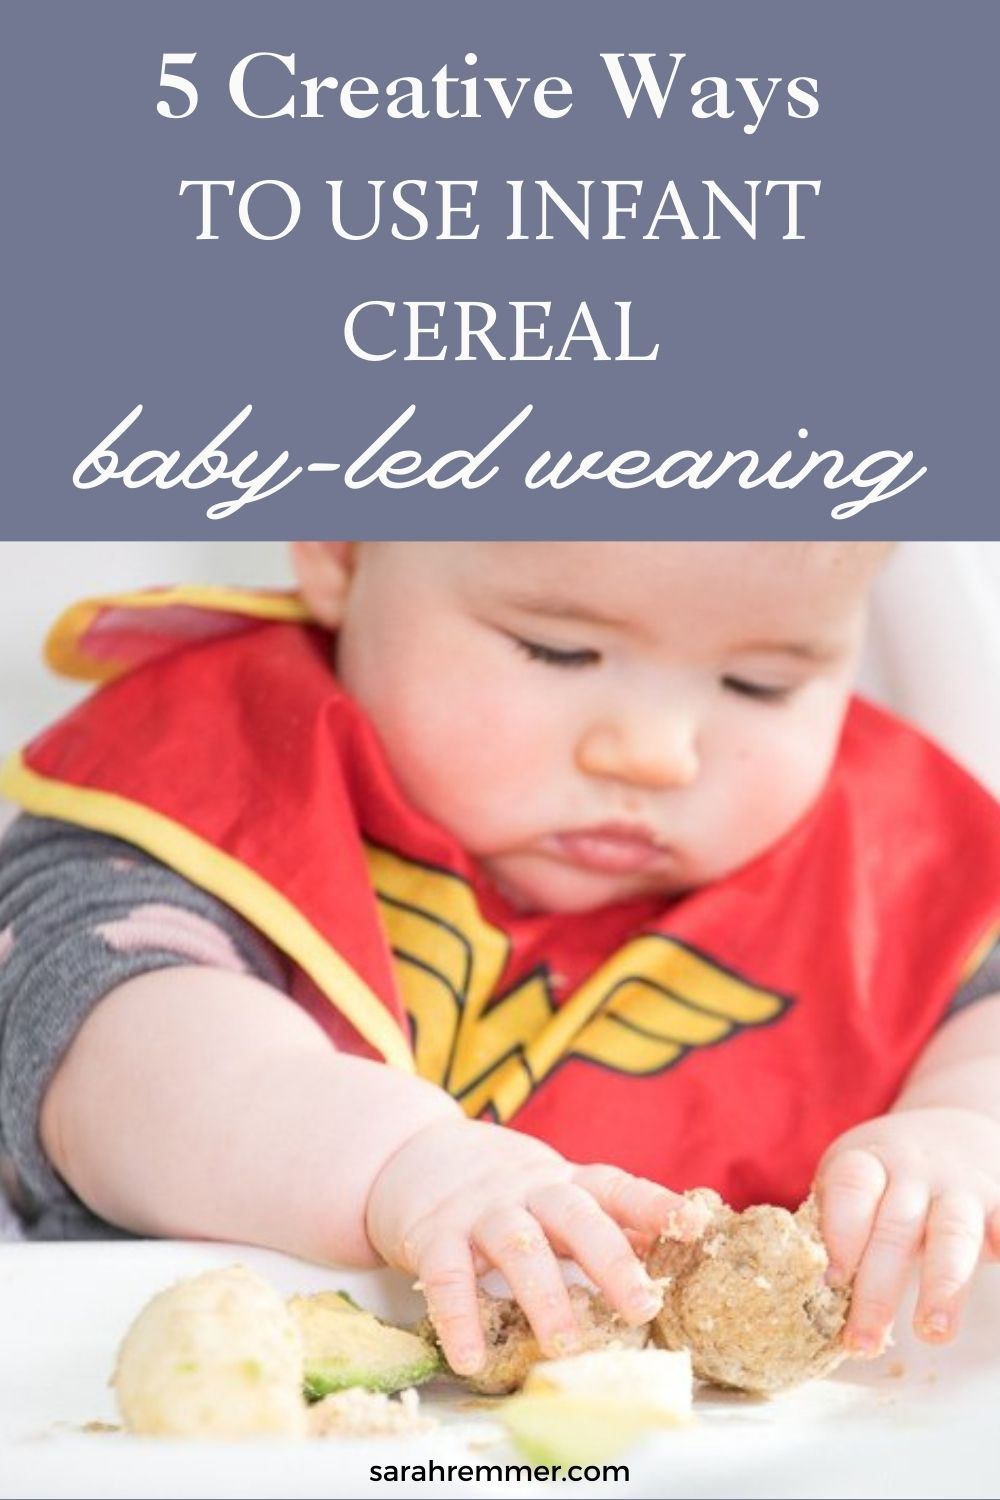 Iron-fortified baby cereal can be used in lots of healthy ways. Here’s 5 recipes for baby-led weaning. Teething biscuits, banana muffins and more!